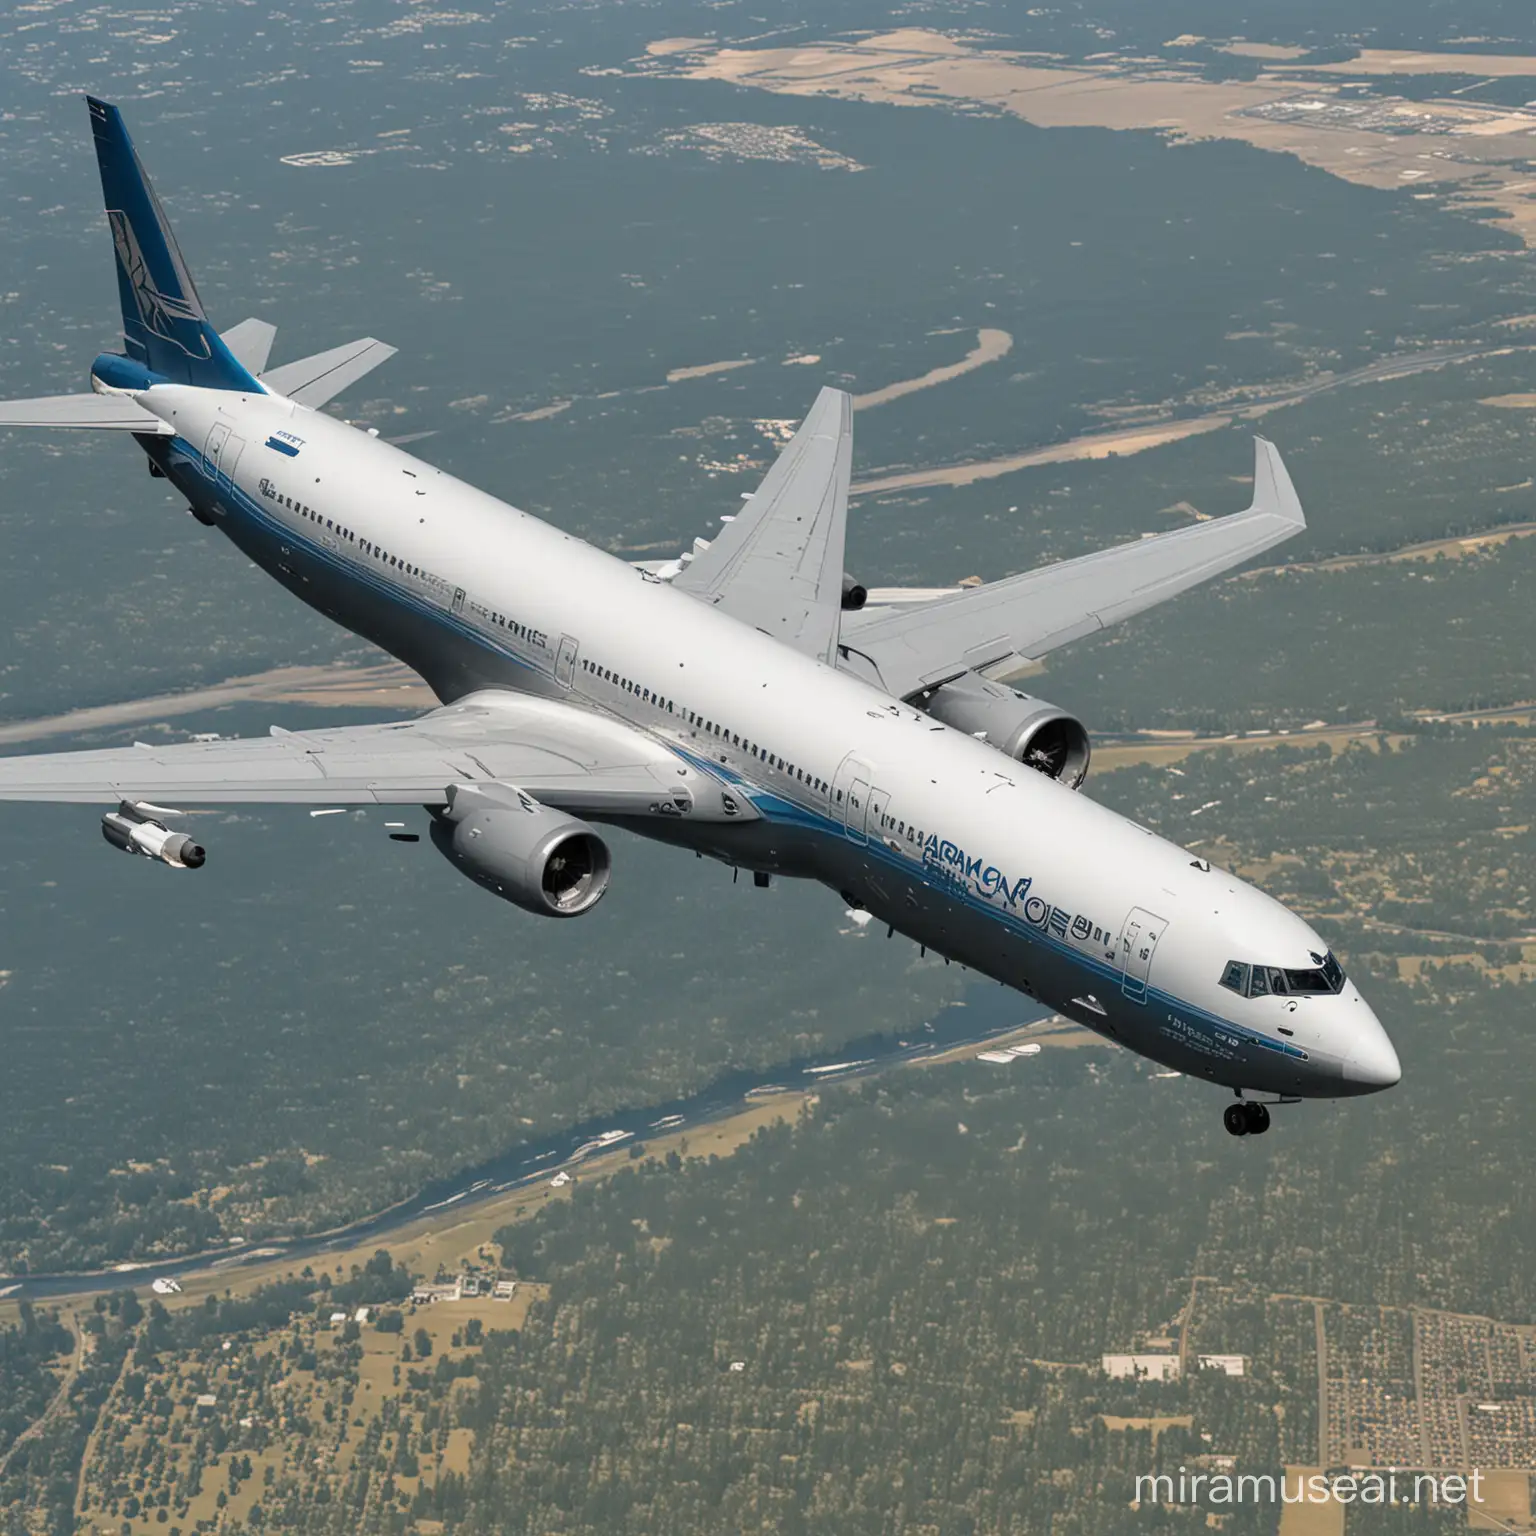 CREATE IMAGE OF Boeing Airborne Command

